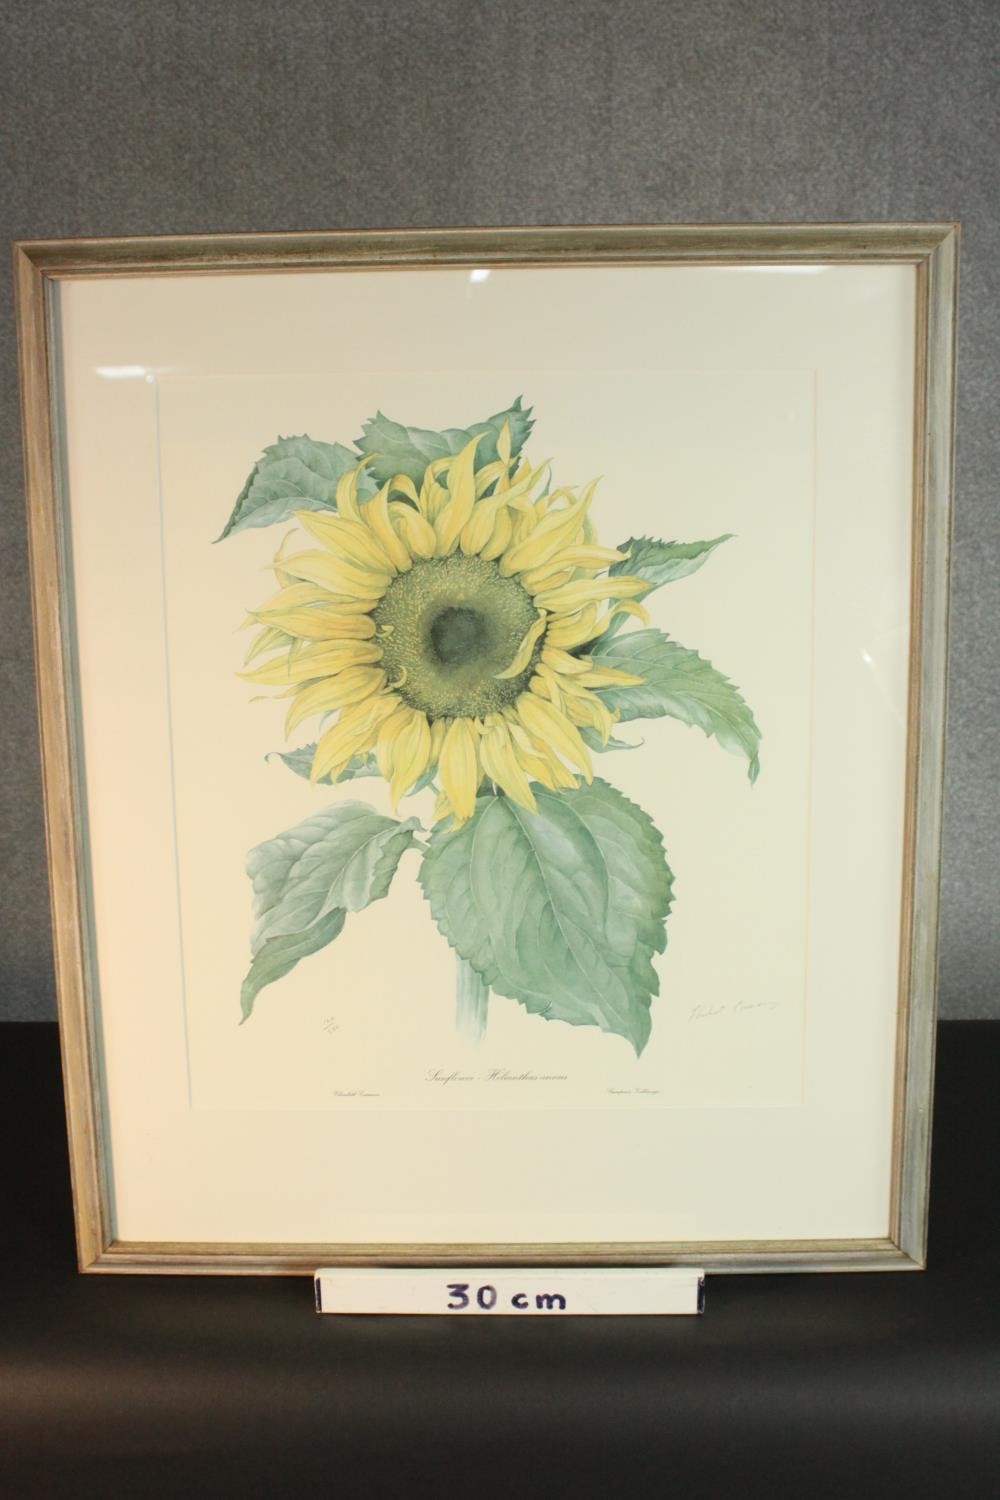 Elizabeth Cameron (1915-2009), Sunflower, limited edition print 120/500, signed and numbered in - Image 3 of 6